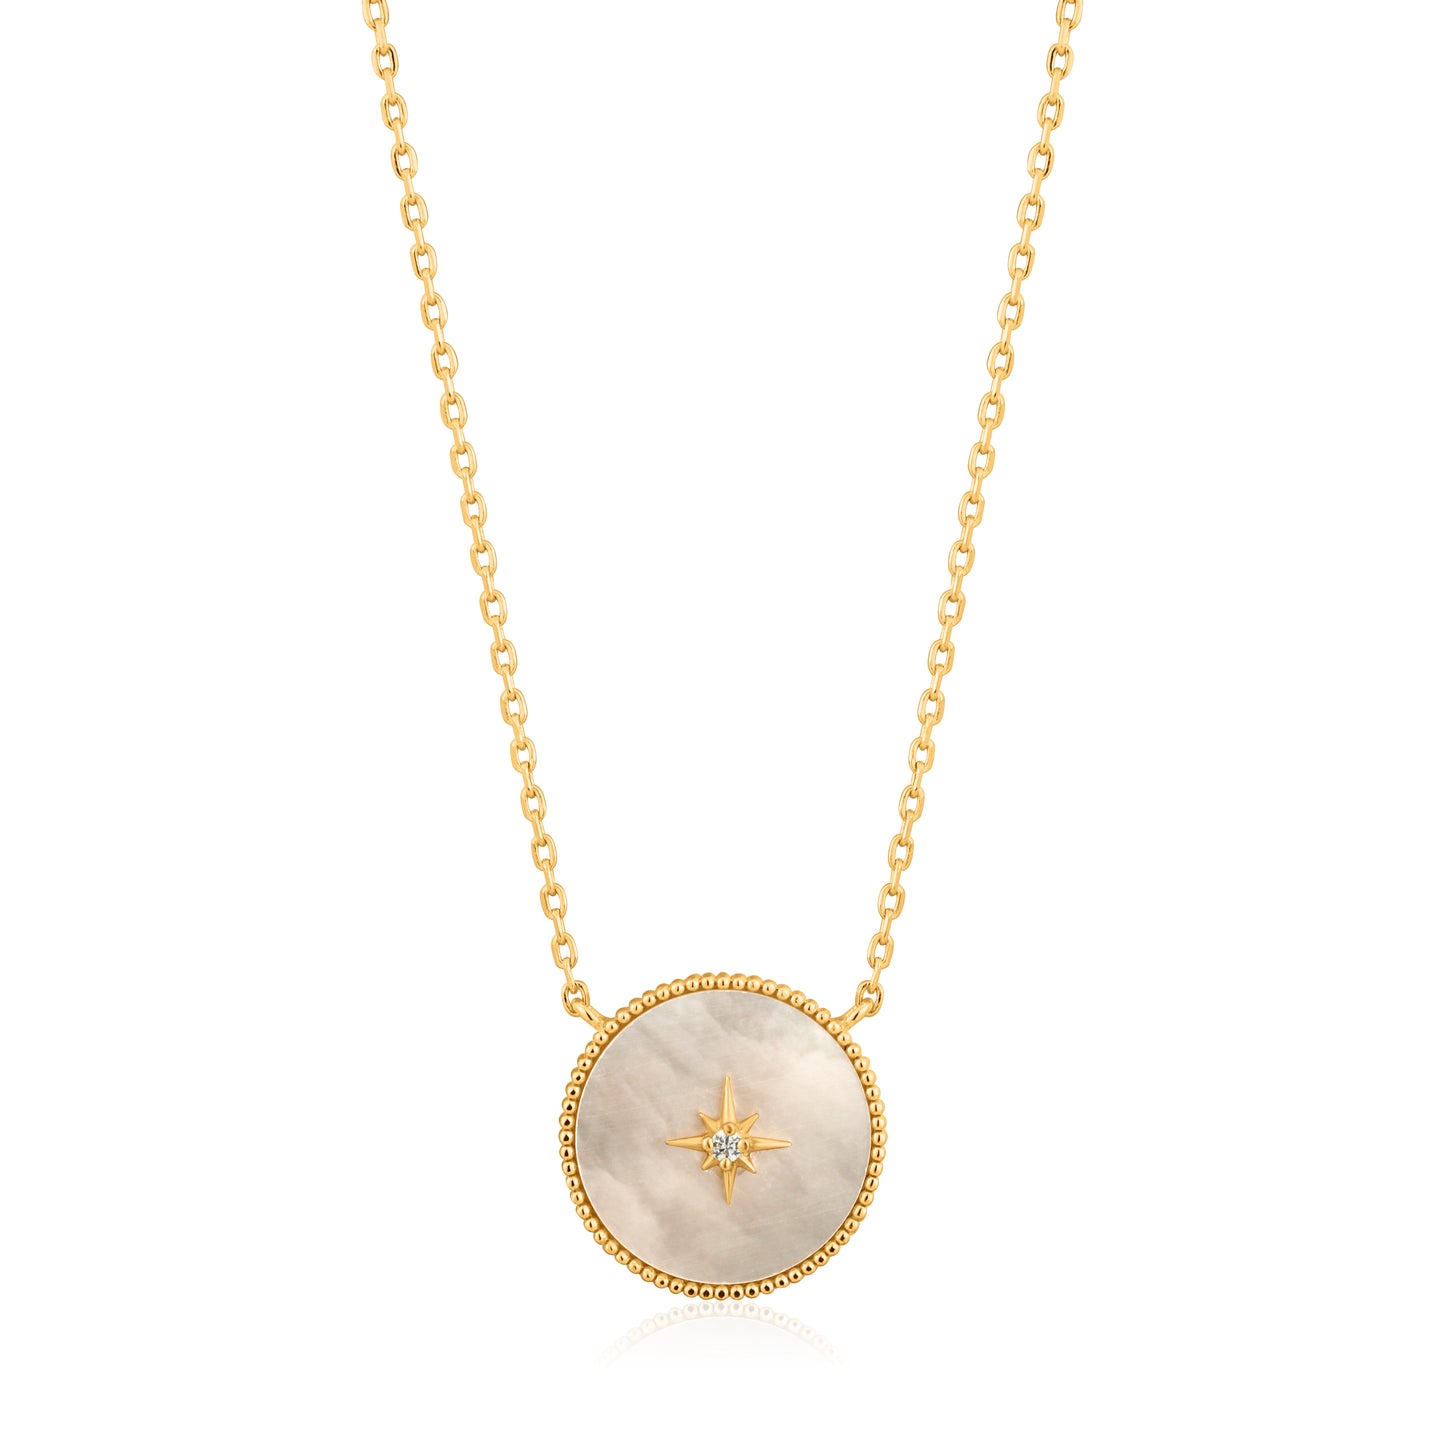 Ania Haie Mother Of Pearl Emblem Necklace